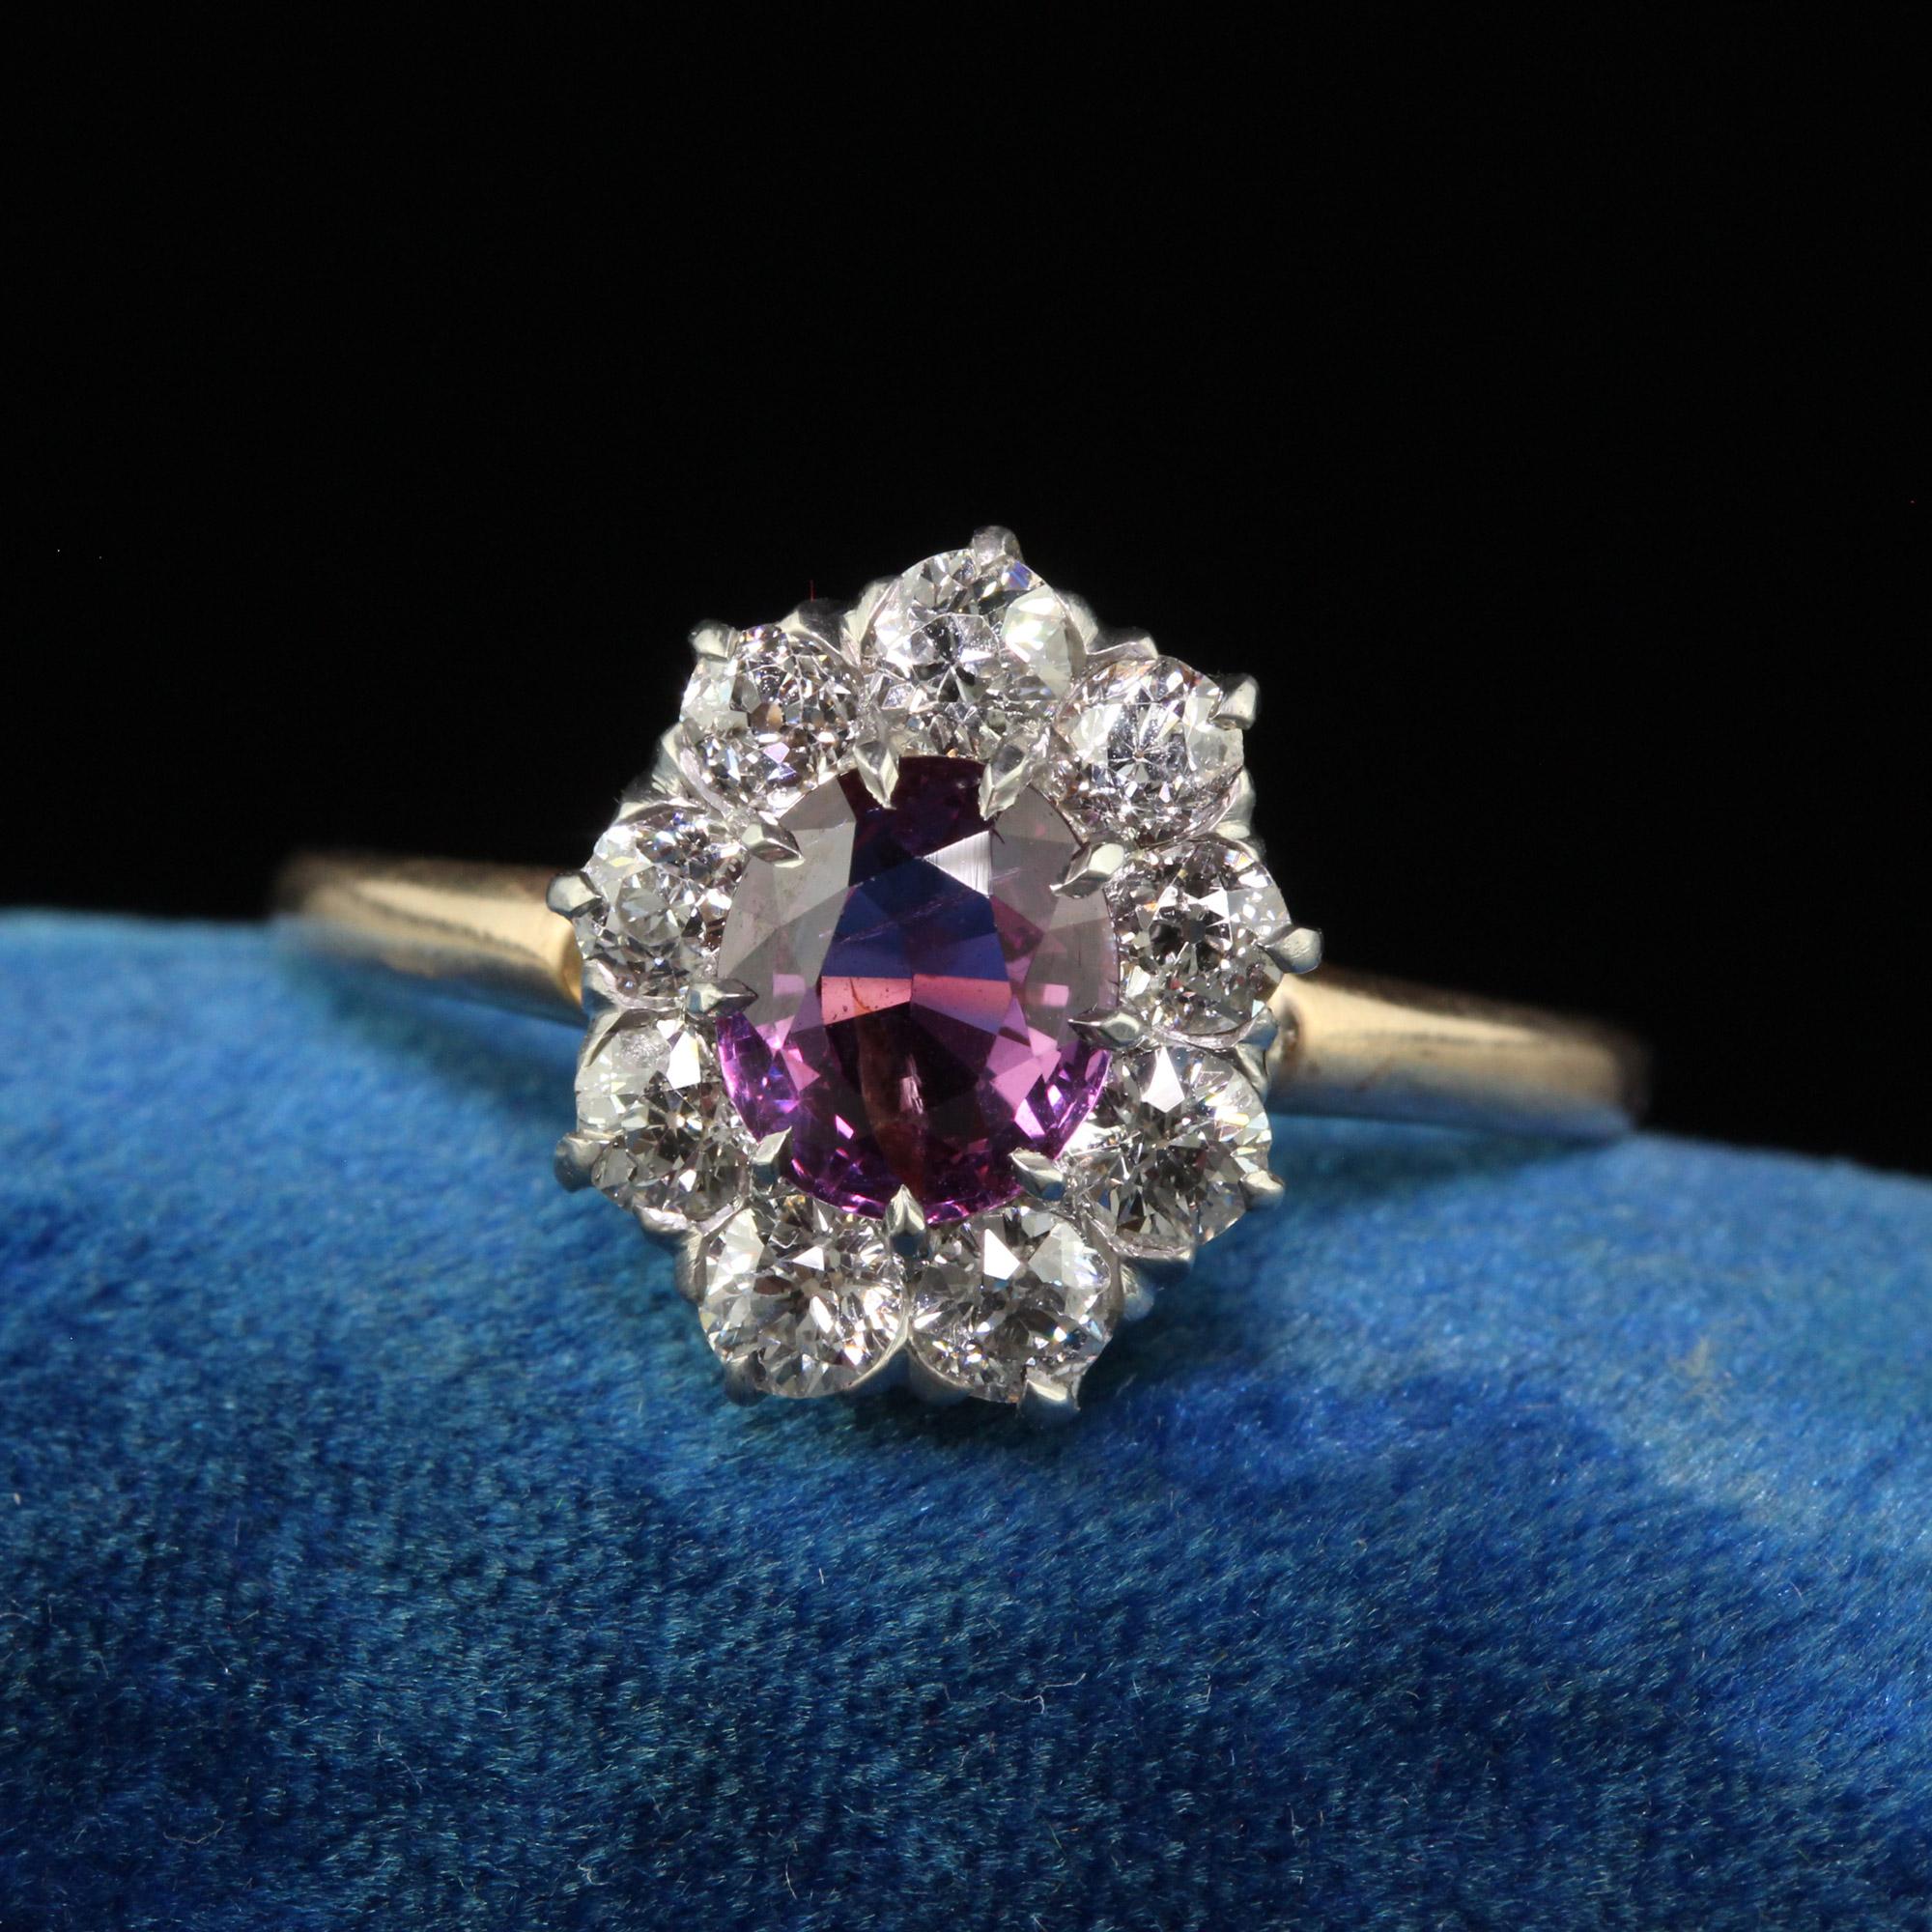 Antique Edwardian 14K Yellow Gold Diamond Sapphire Cluster Engagement Ring - GIA. This beautiful pink sapphire engagement ring is crafted in 14k yellow gold. The center holds a natural Pink-Purple sapphire that has a GIA report. The natural sapphire